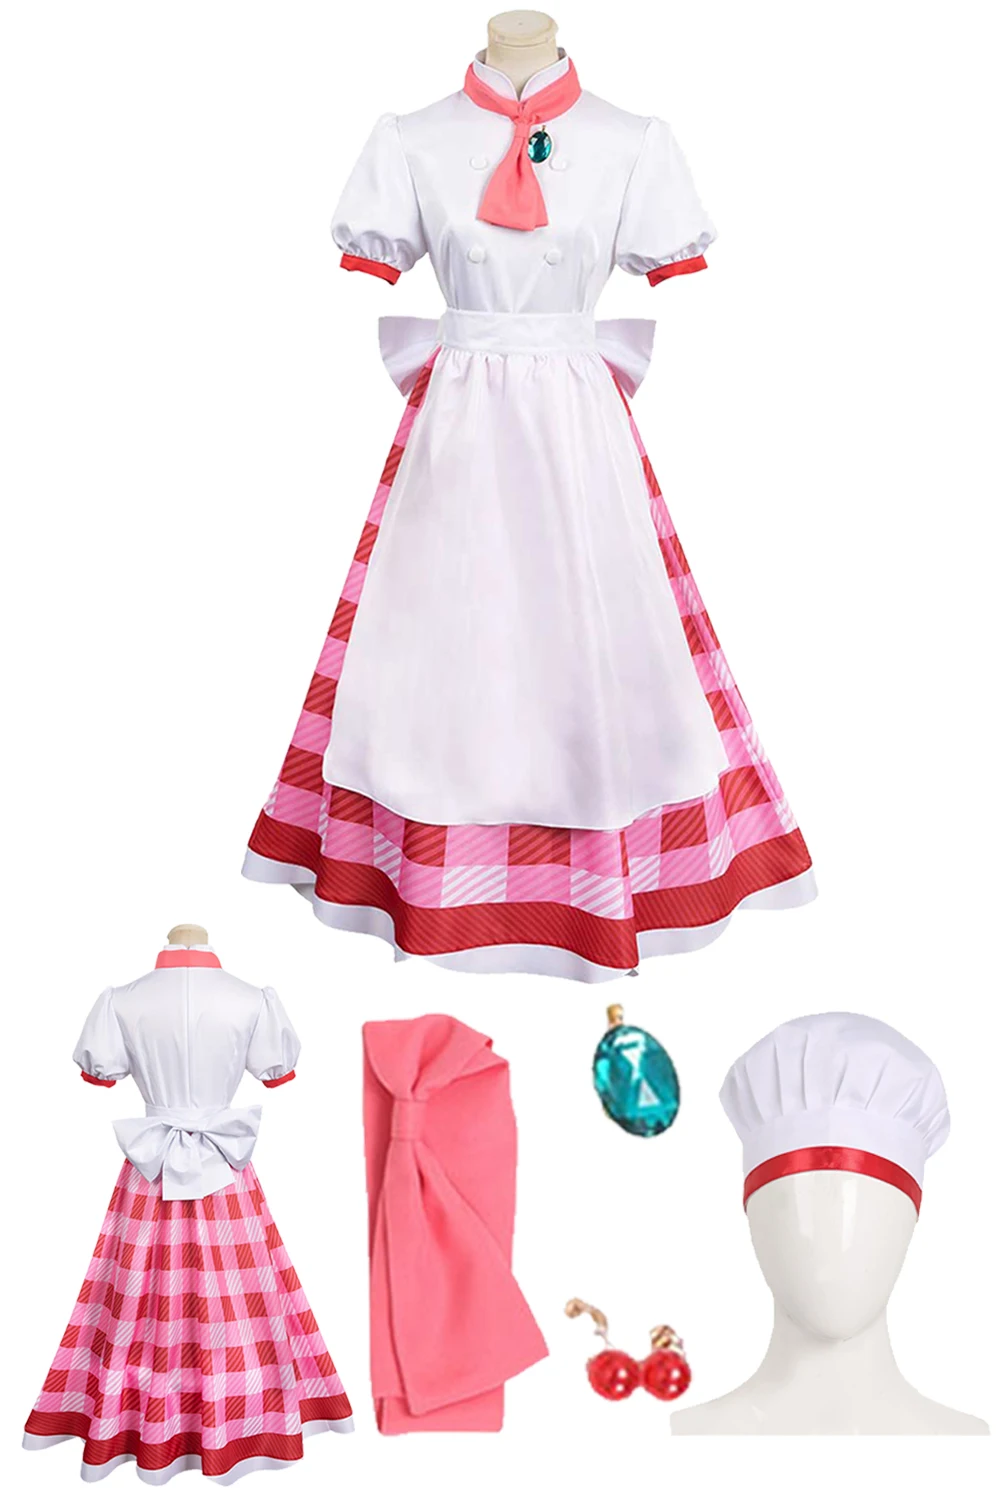 

Chef Peach Cosplay Pink Maid Dress Outfits Women Costume Anime Game Showtime Disguise Hat Set Girl Halloween Party Roleplay Suit